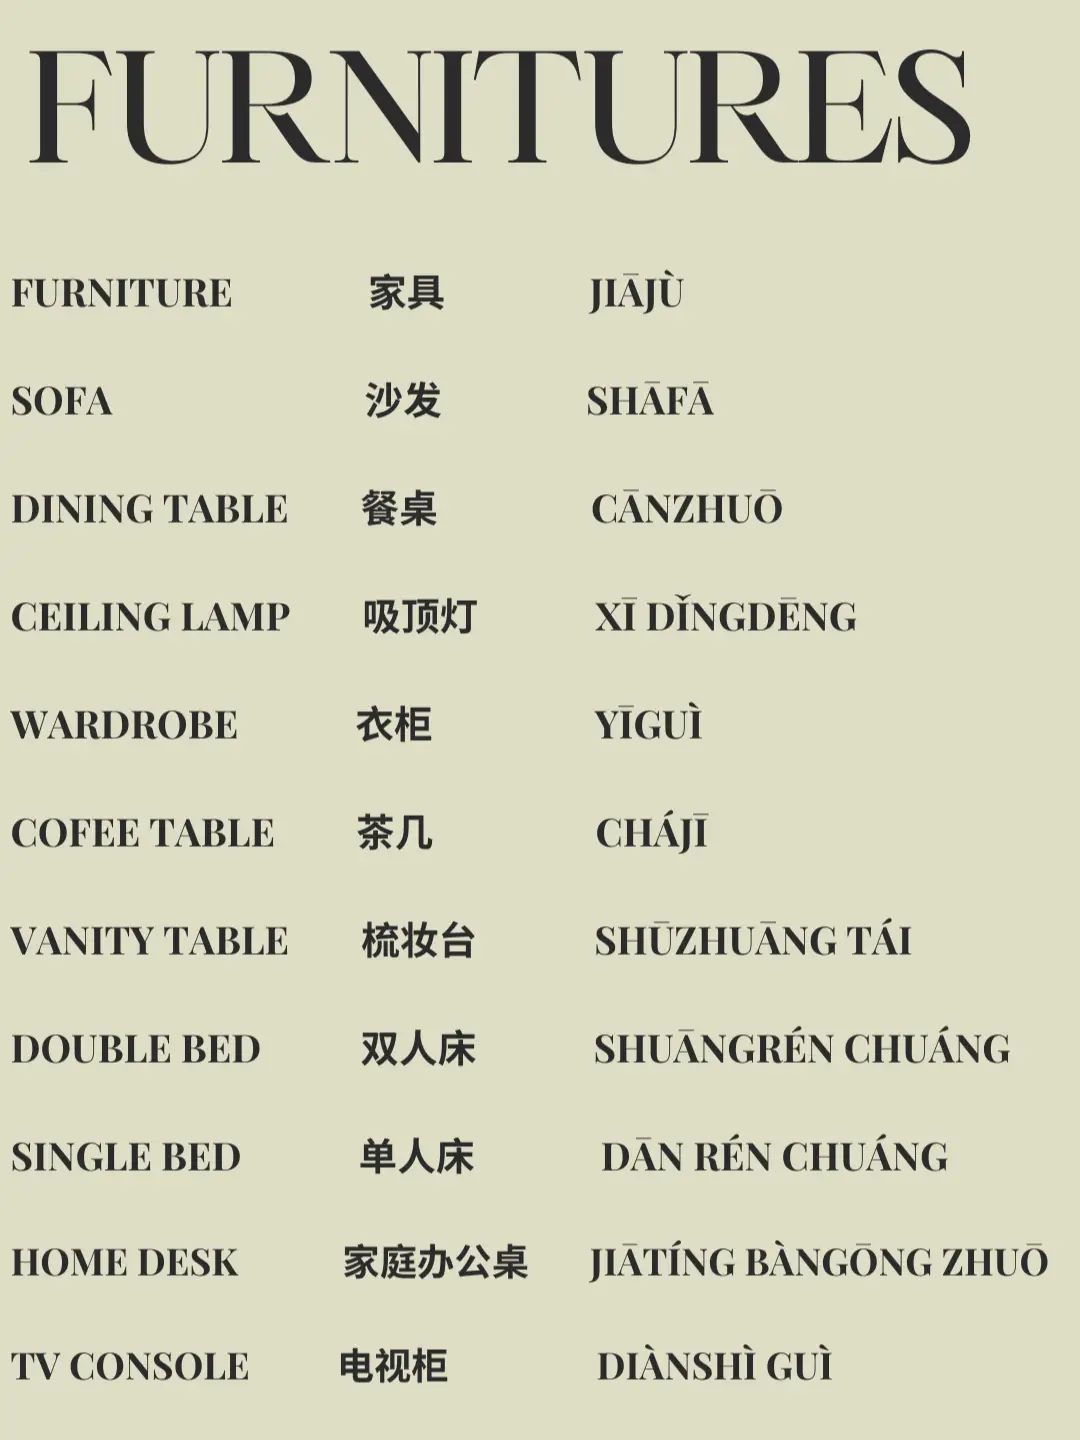 USEFUL TAOBAO KEYWORDS FOR HOME SHOPPING! 🏡, Gallery posted by Elaine C.